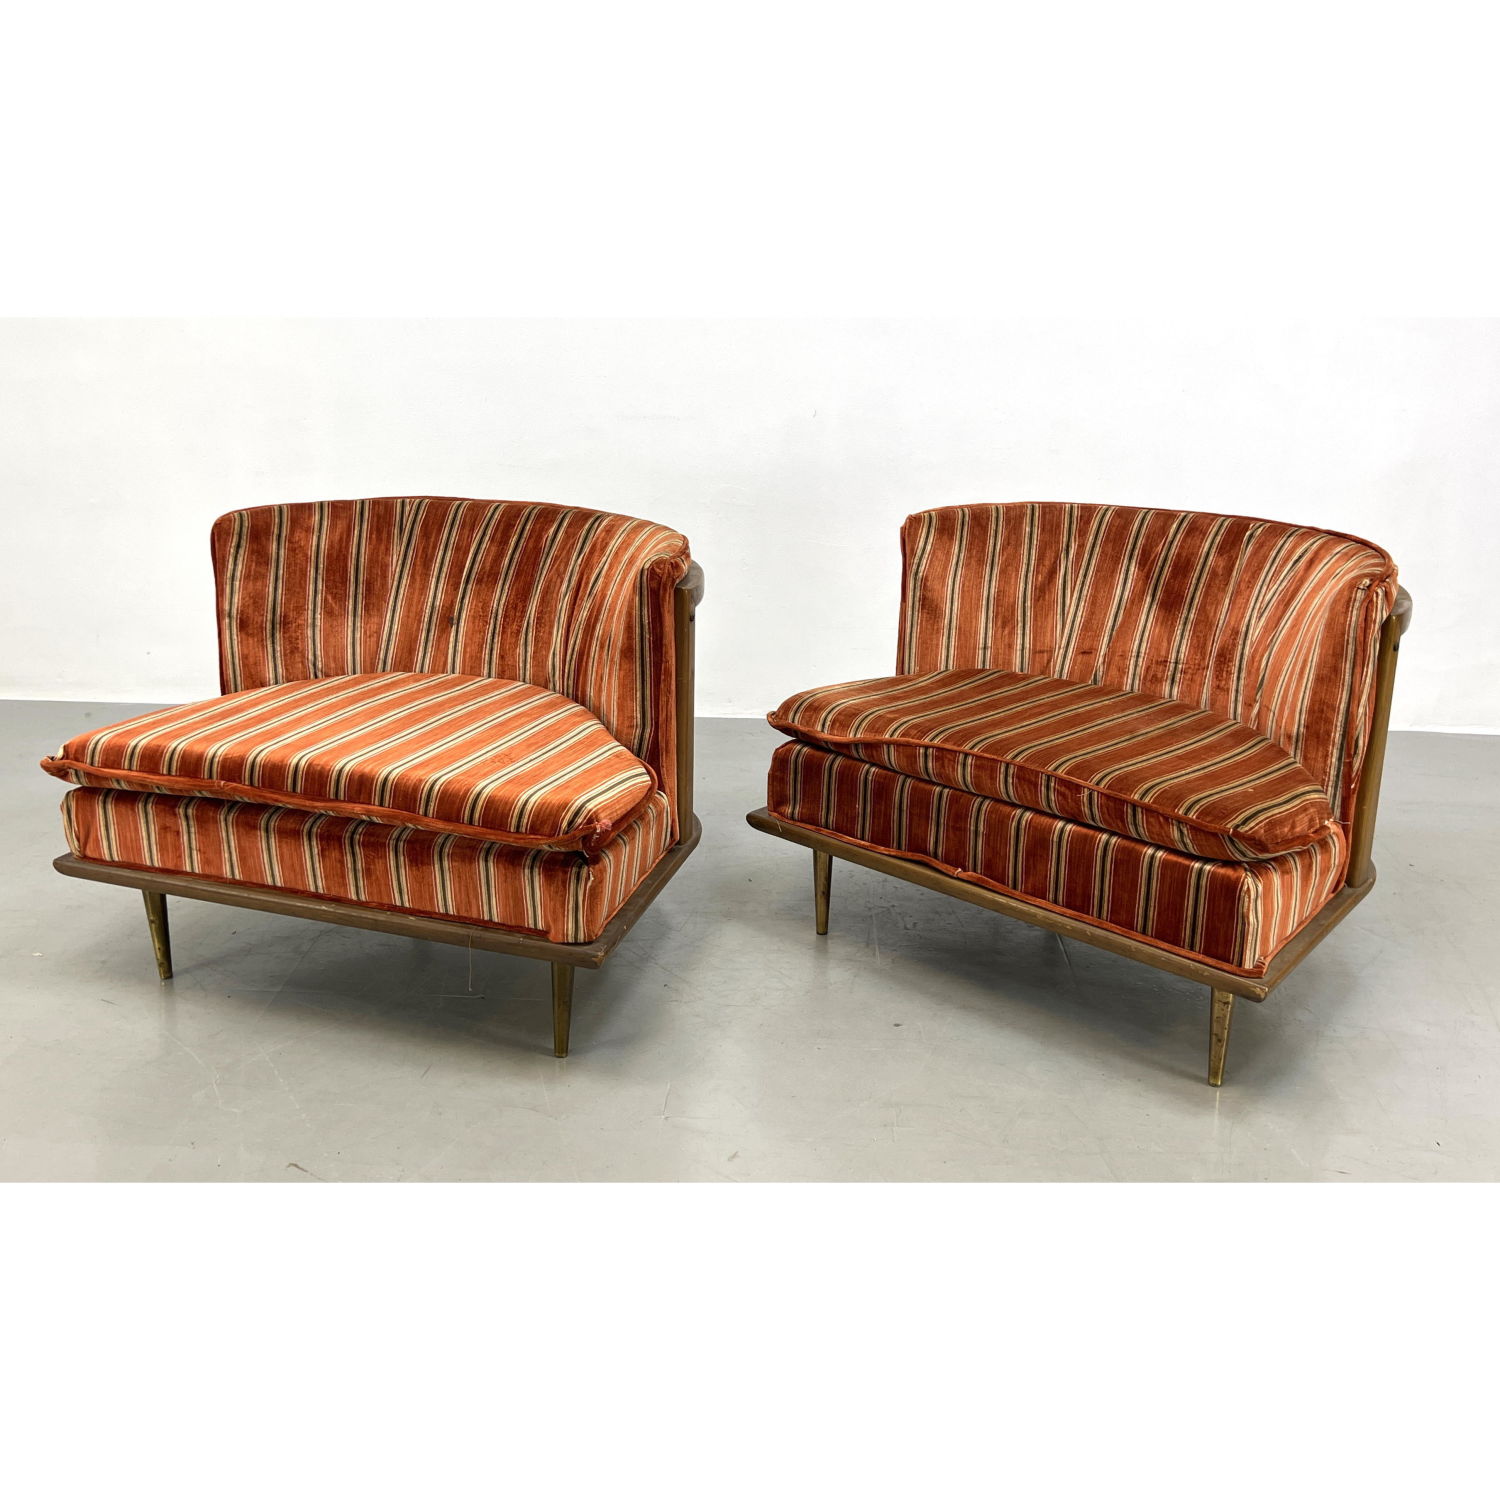 Pr Bowed Back Upholstered Lounge Chairs.